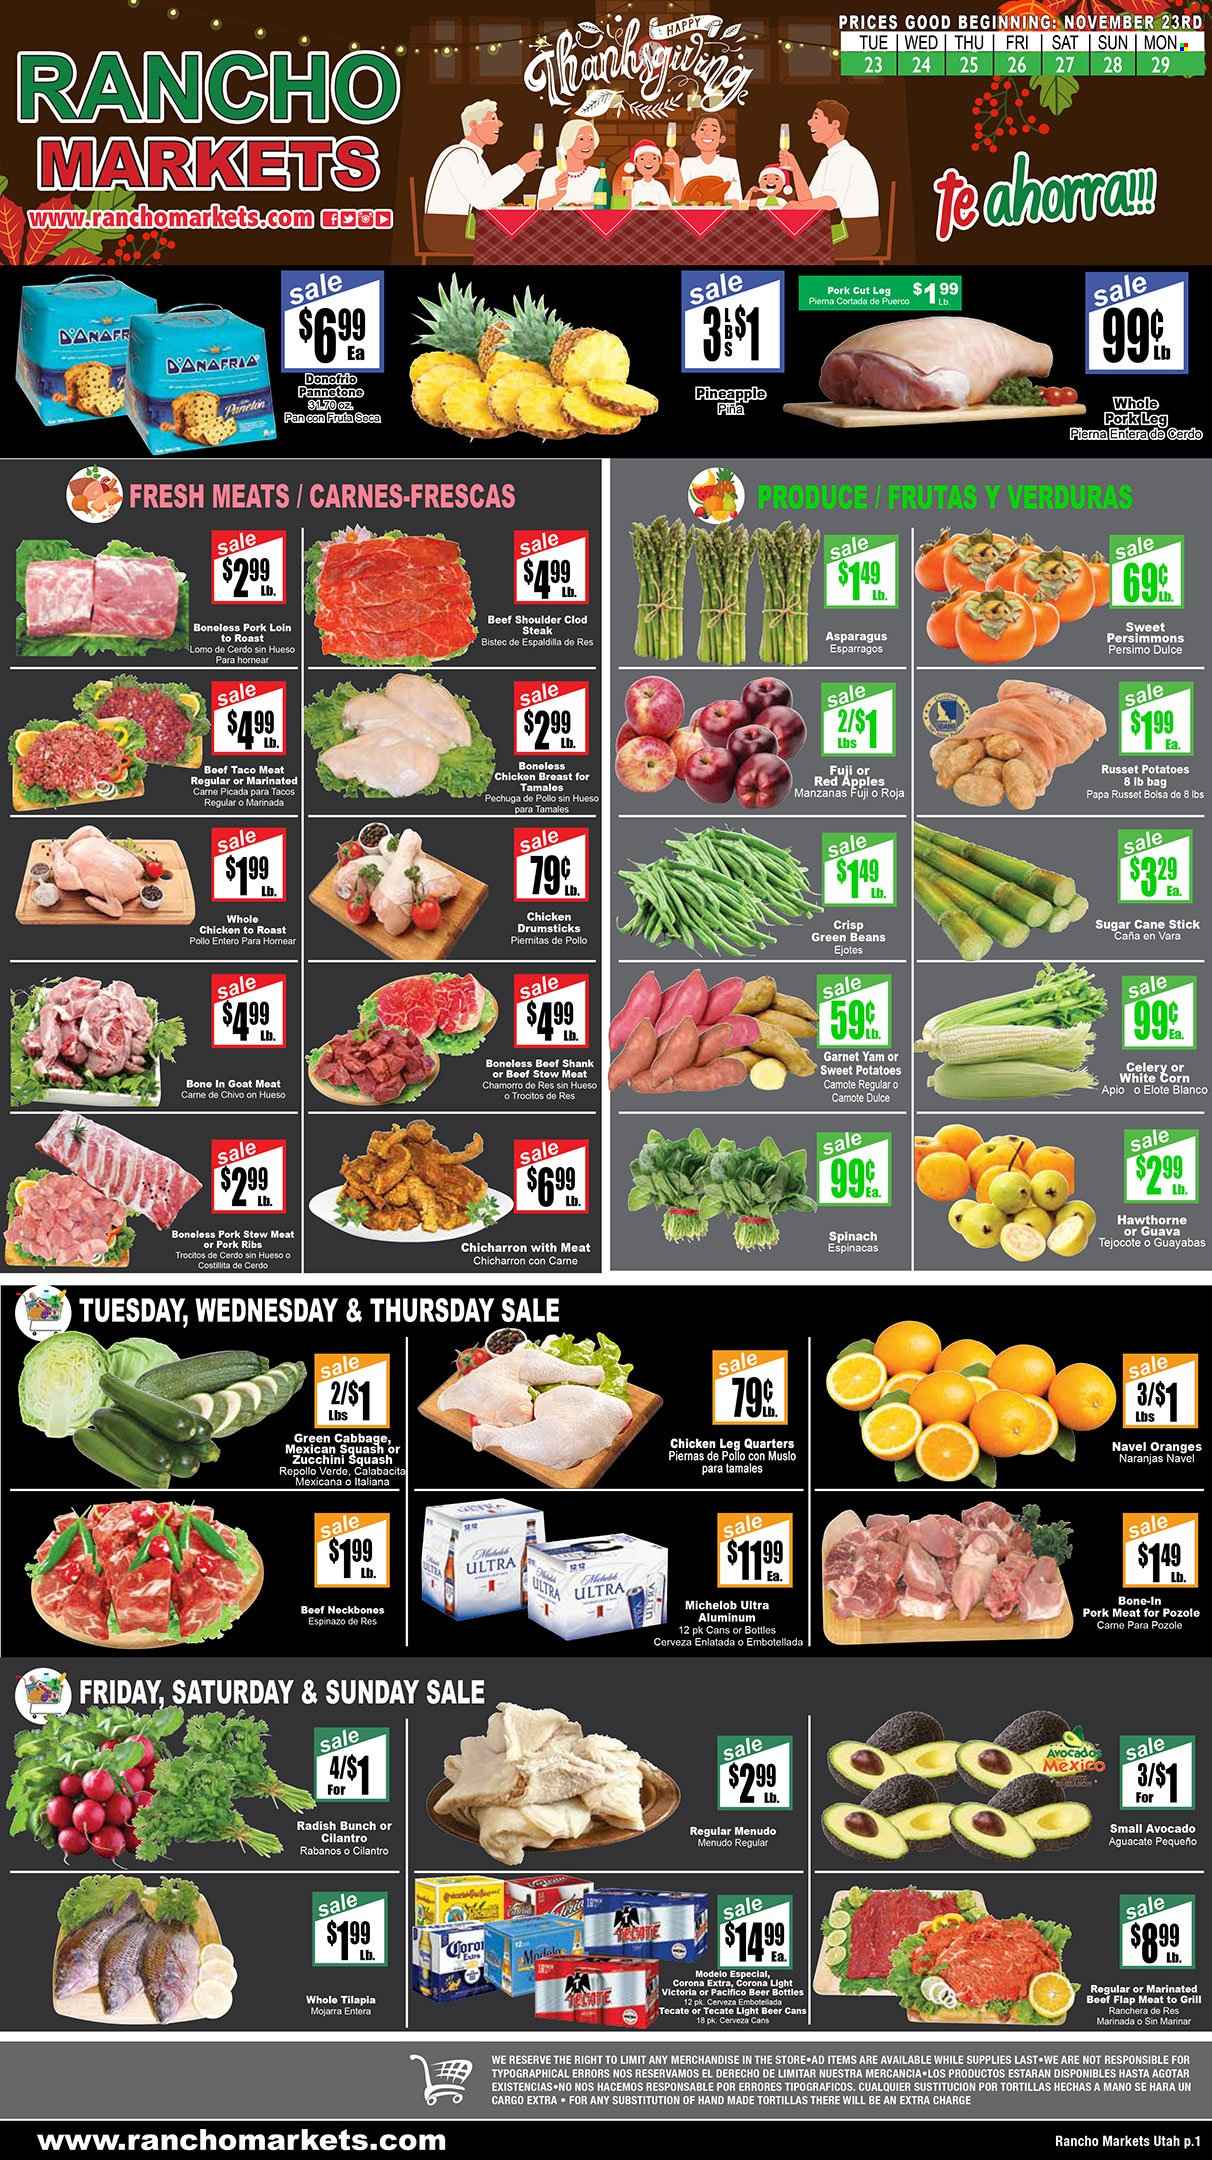 thumbnail - Rancho Markets Flyer - 11/23/2021 - 11/29/2021 - Sales products - stew meat, tortillas, asparagus, beans, cabbage, corn, green beans, radishes, russet potatoes, spinach, sweet potato, zucchini, potatoes, mexican squash, apples, avocado, pineapple, persimmons, oranges, sugar cane, tilapia, fish, roast, chicken breasts, cilantro, alcohol, beer, Corona Extra, Modelo, whole chicken, chicken legs, chicken drumsticks, chicken, beef meat, beef shank, steak, marinated beef, ribs, pork loin, pork meat, pork ribs, pork leg, goat meat, pan, guava, Michelob, navel oranges. Page 1.